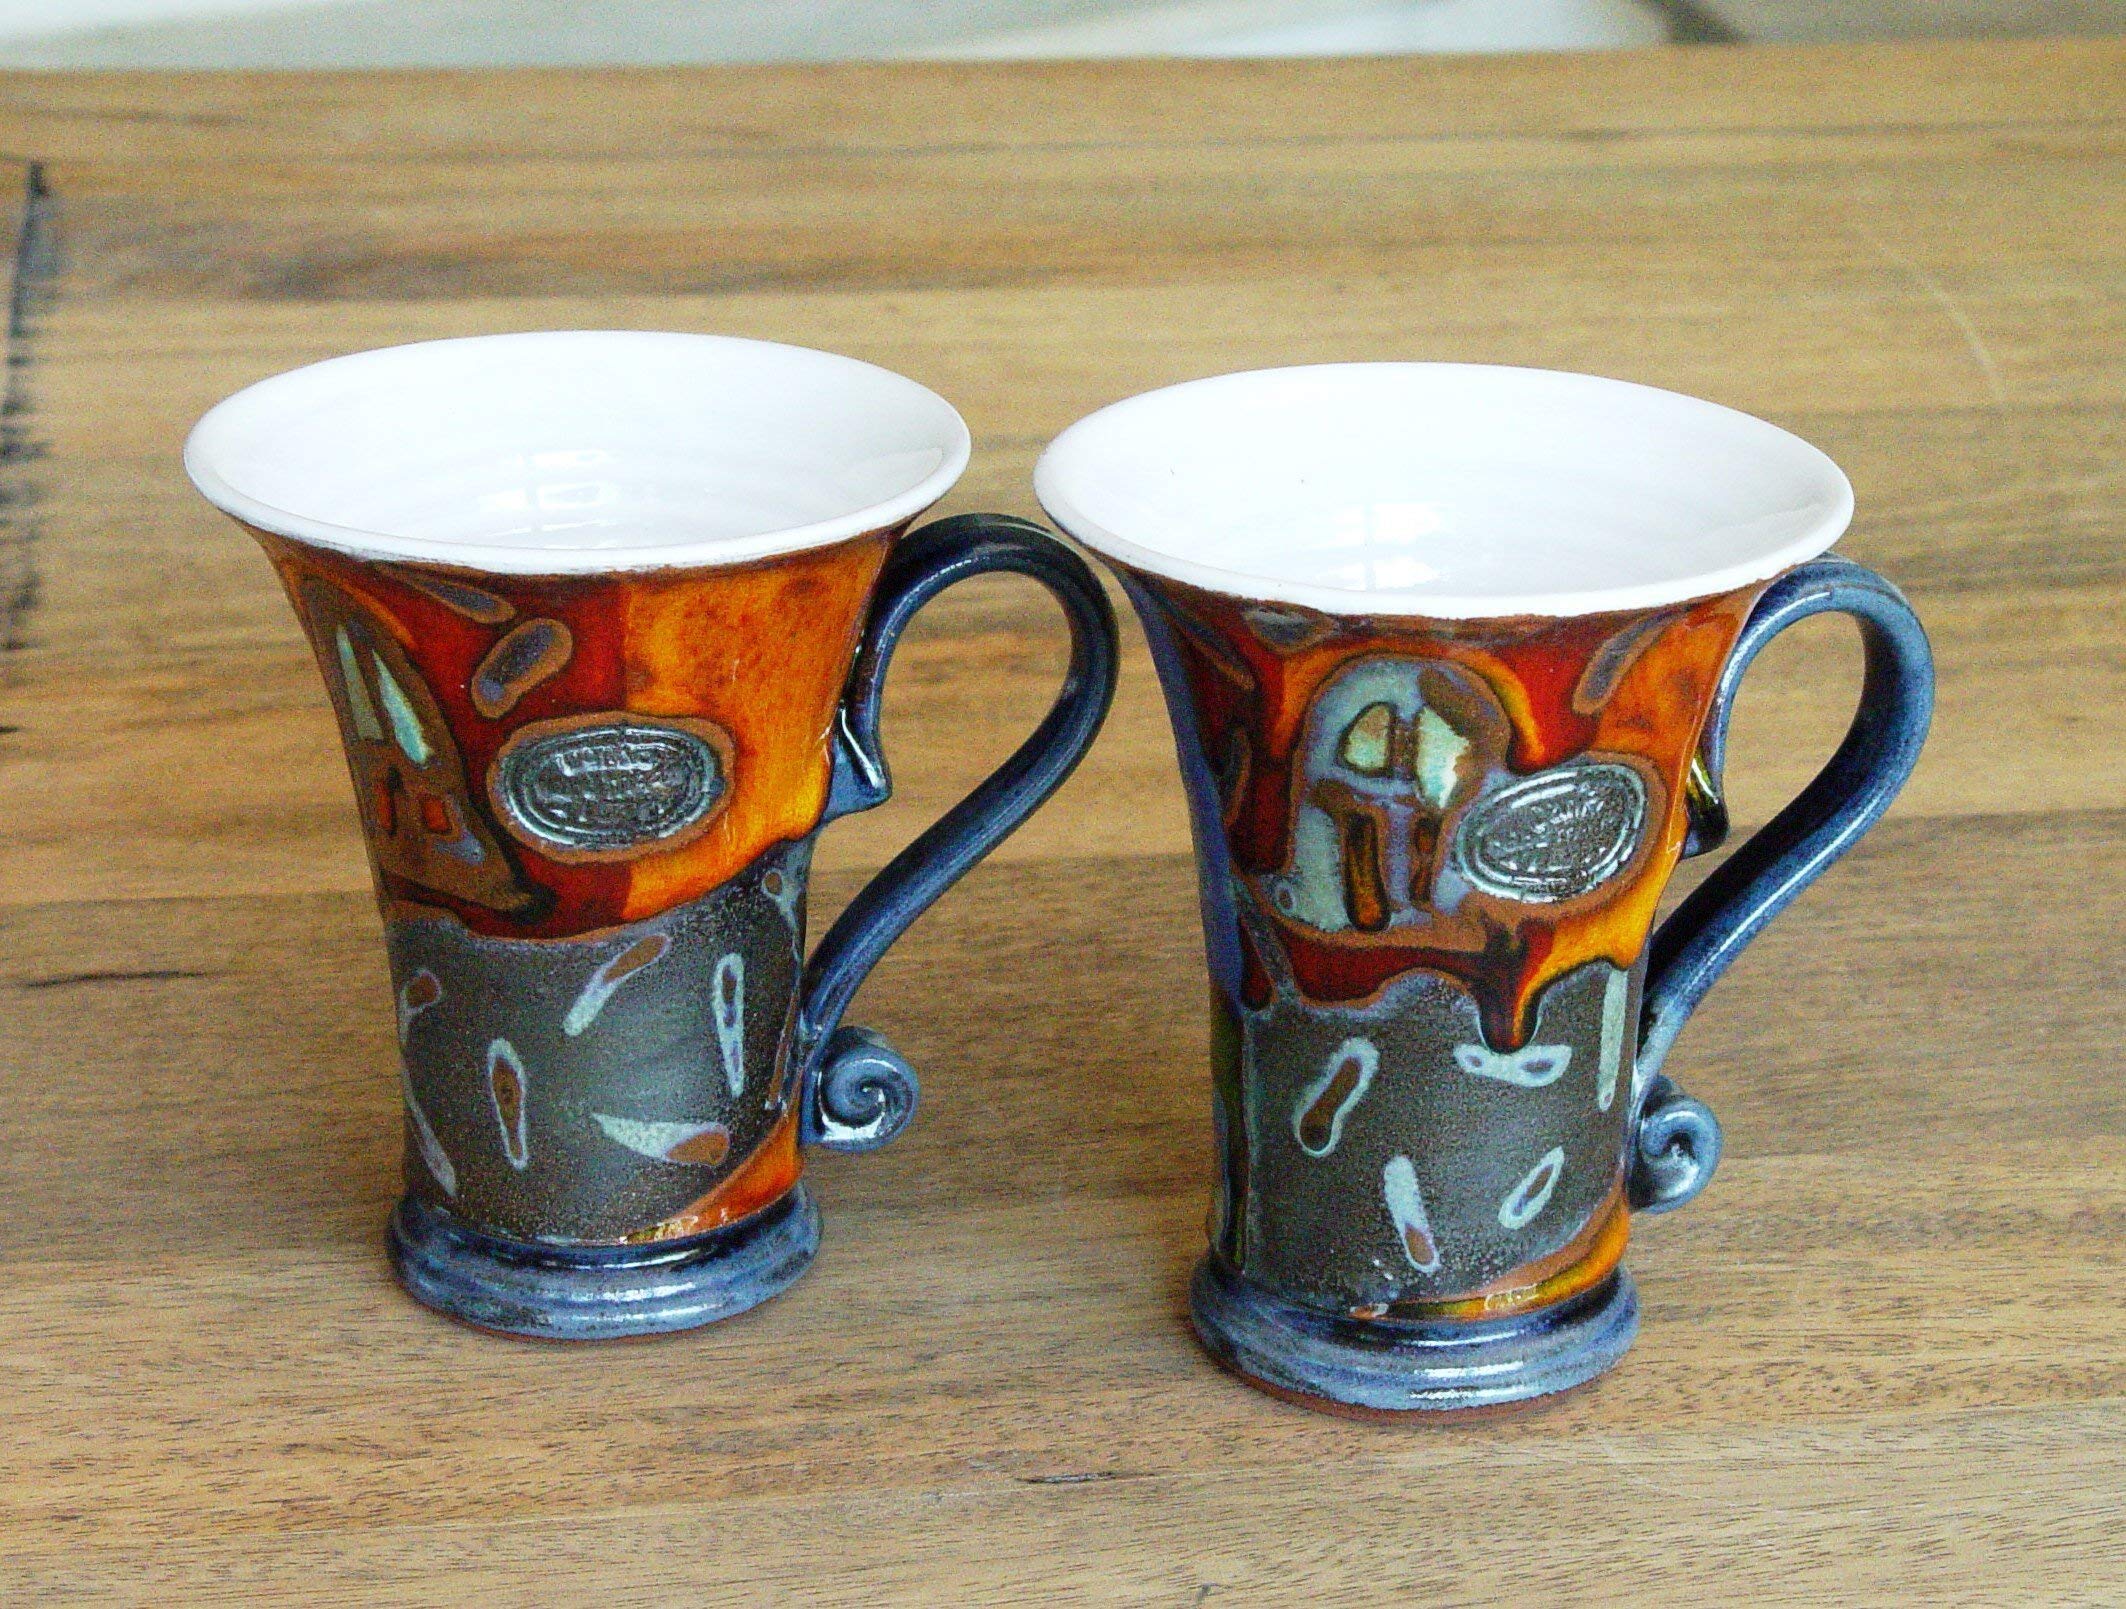 Set of Two Coffee Mugs, Colorful Ceramic Mugs with Unique Hand Painted Decoration, Danko Pottery